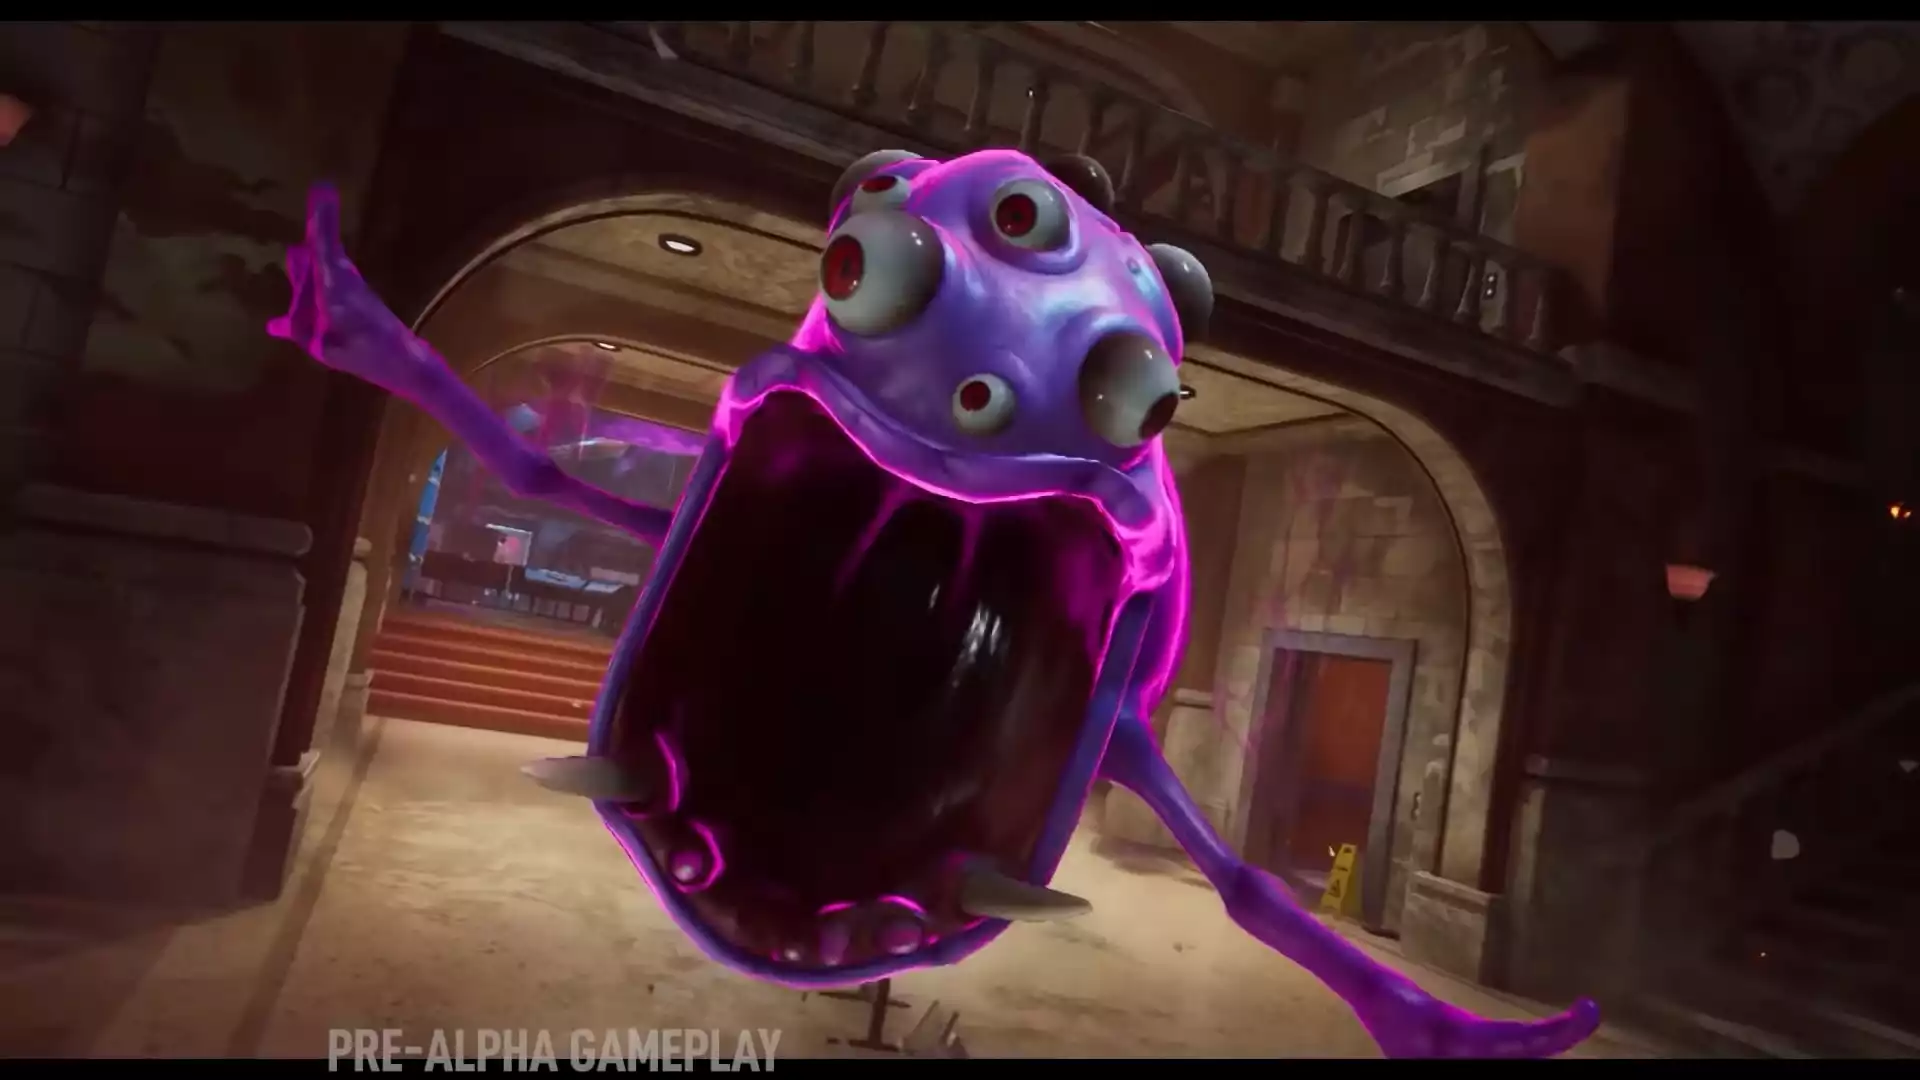 Ghostbusters: Spirits Unleashed Release Date, Trailer, Gameplay, And More